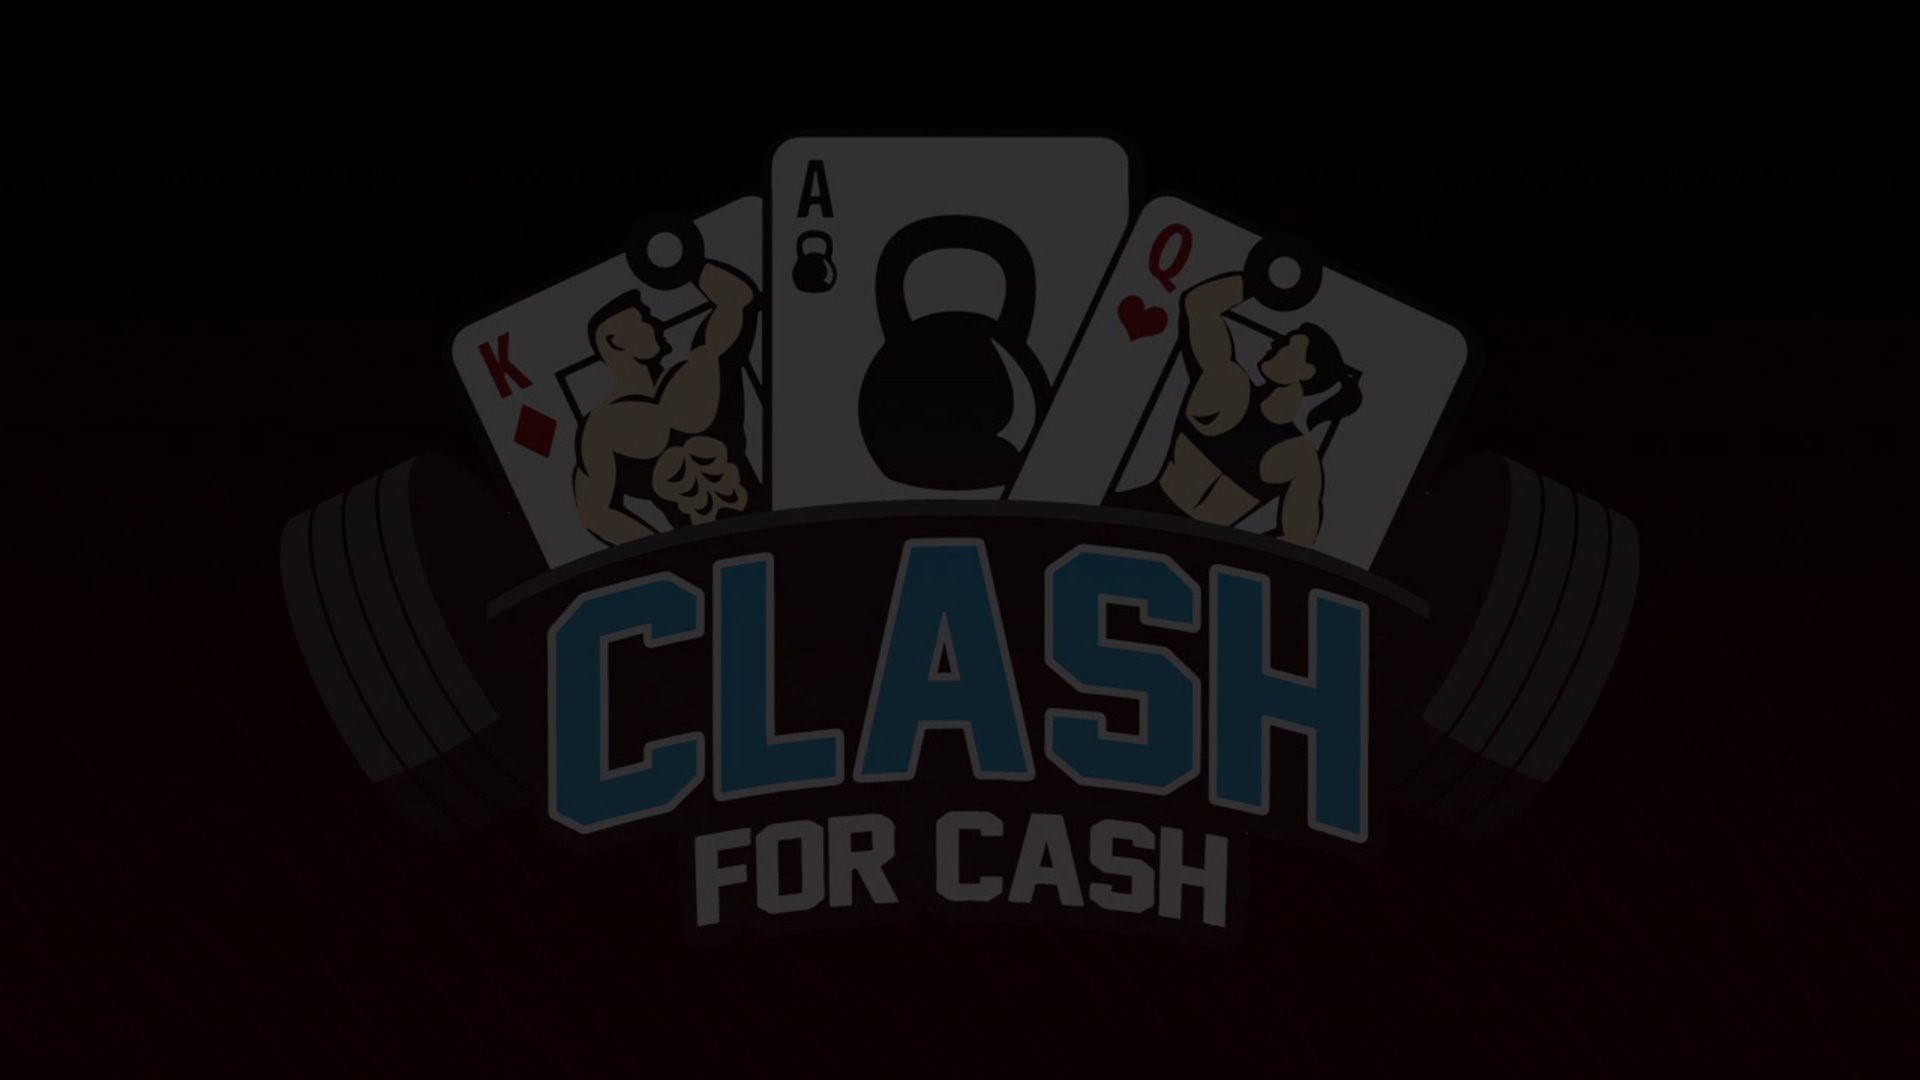 Behind The Scenes Of Clash For Cashl